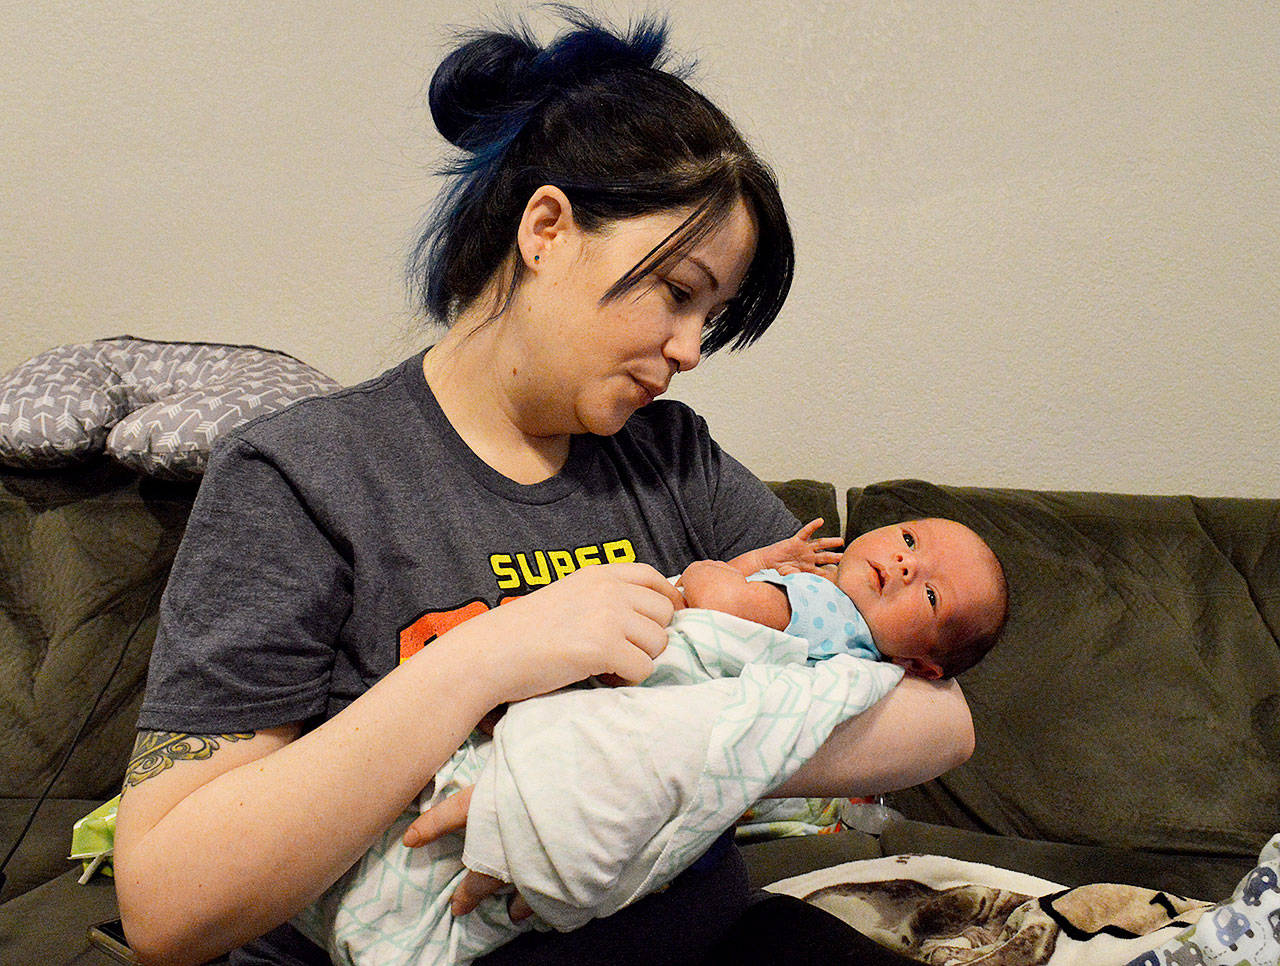 Amanda White and her brand-new baby boy Taliesin White, born at 12:40 a.m. Jan. 1. Photo by Laura Guido/Whidbey News-Times